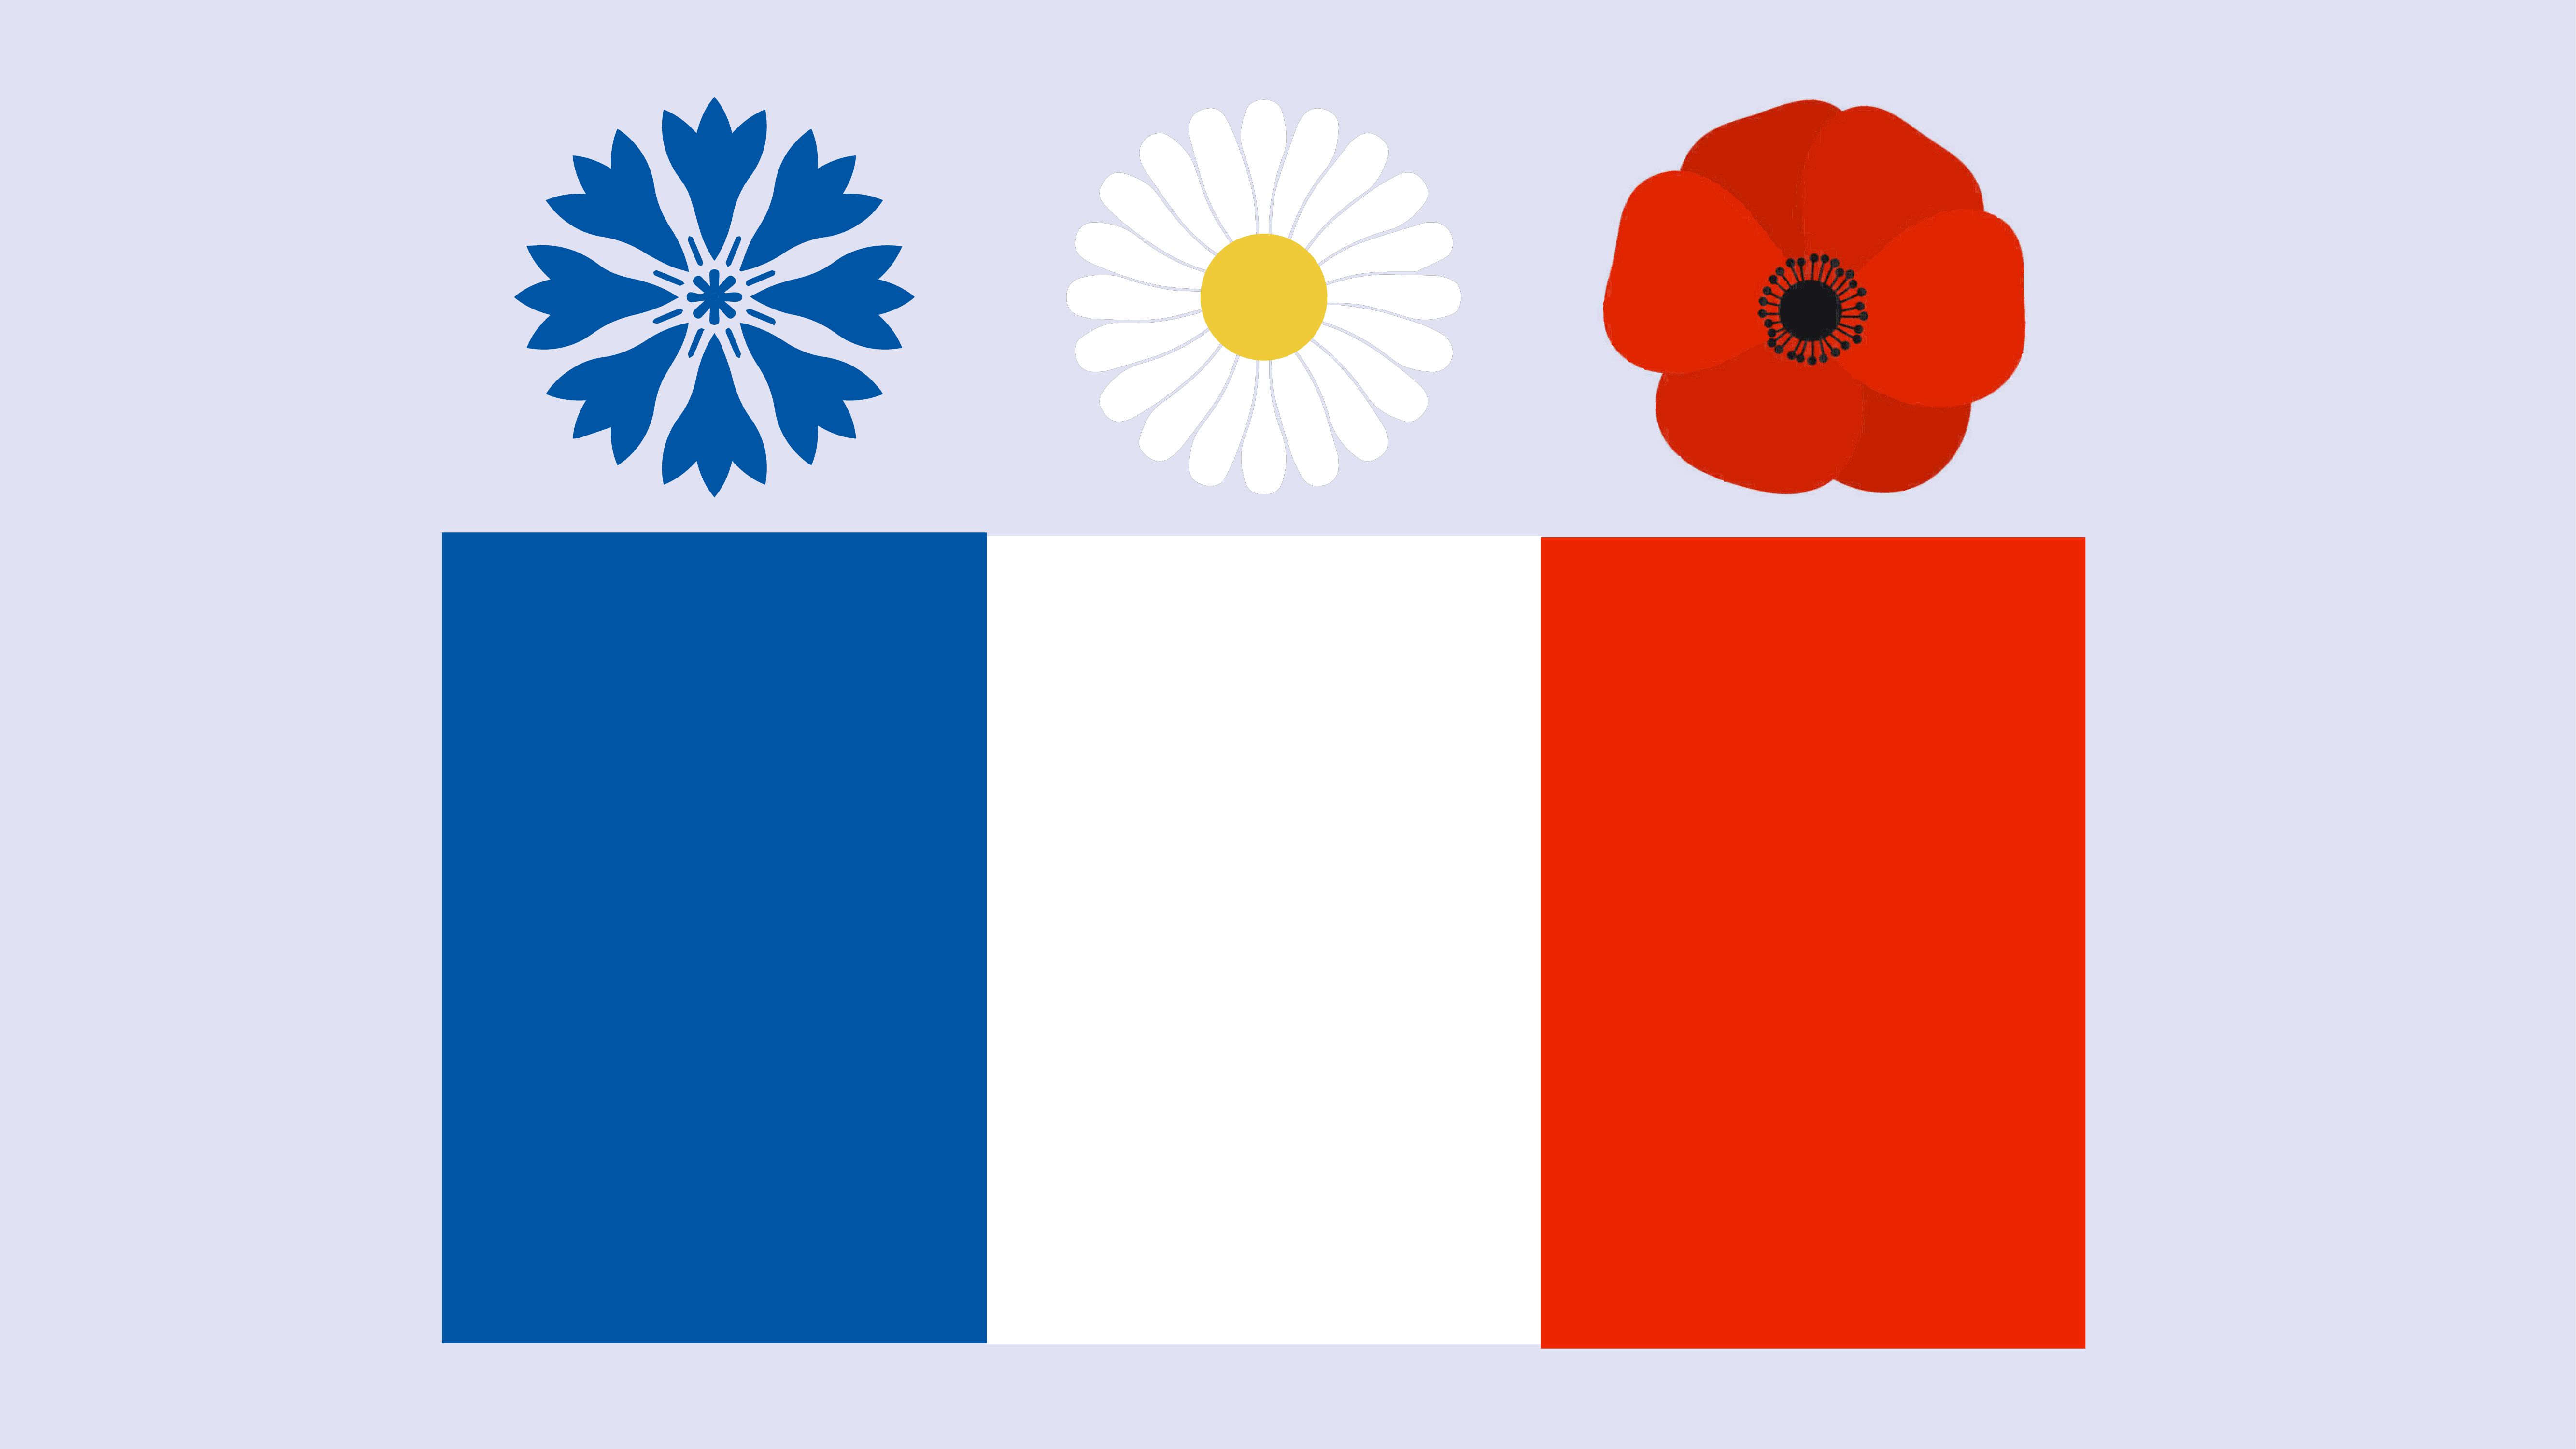 A cornflower, daisy, and poppy being held up over the french flag